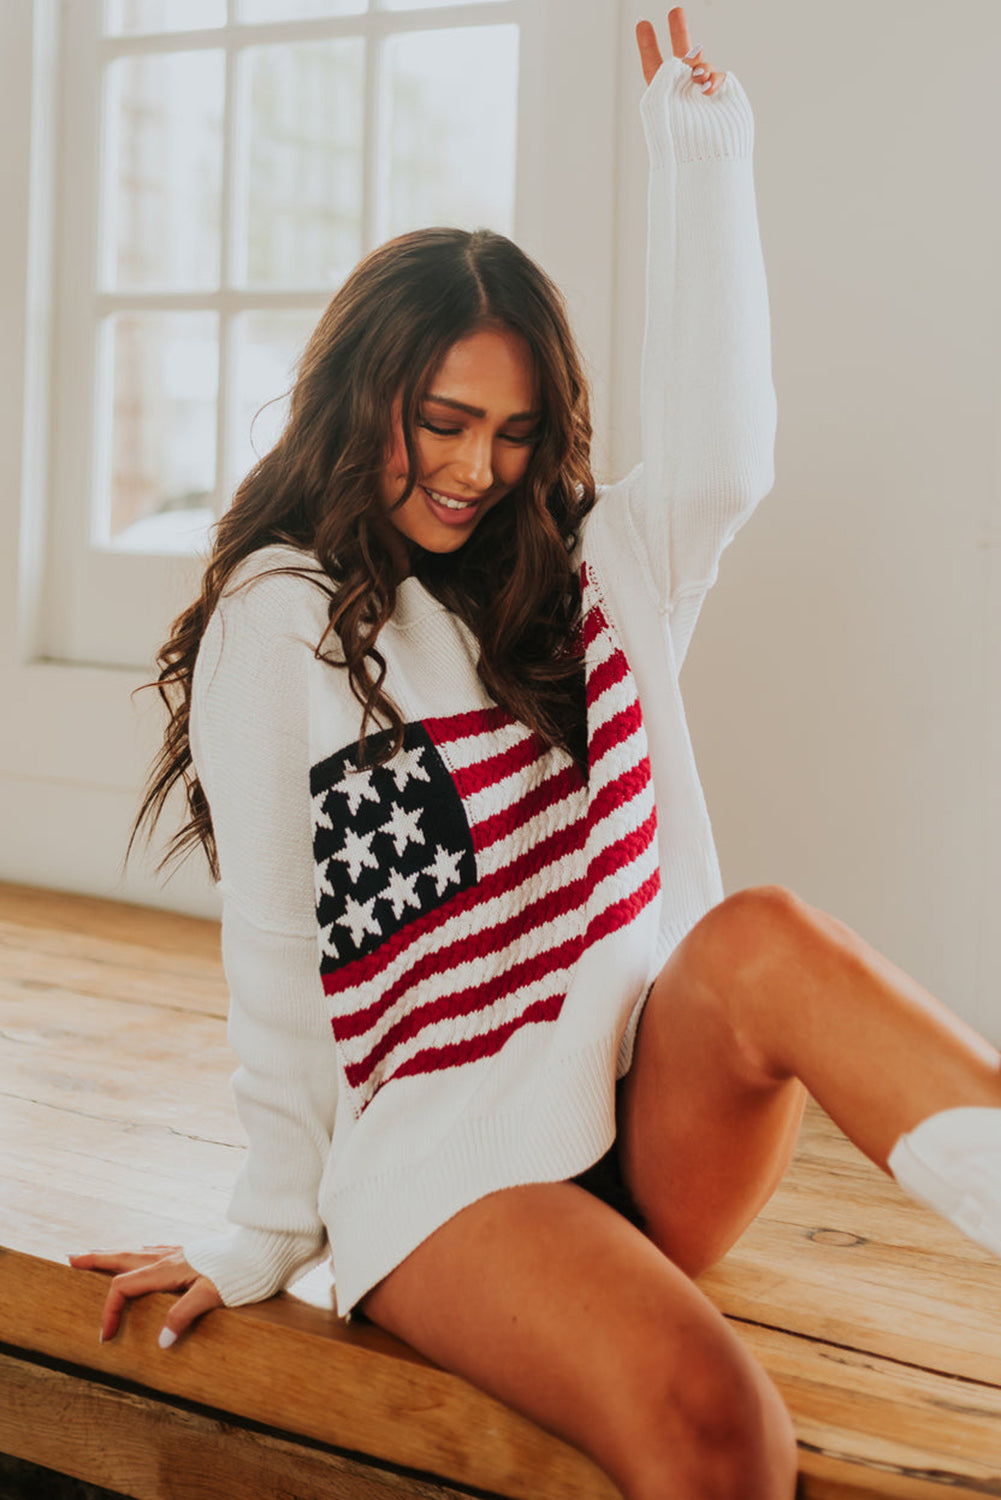 White American Flag Crochet Knit Sweater Pre Order Sweaters & Cardigans JT's Designer Fashion